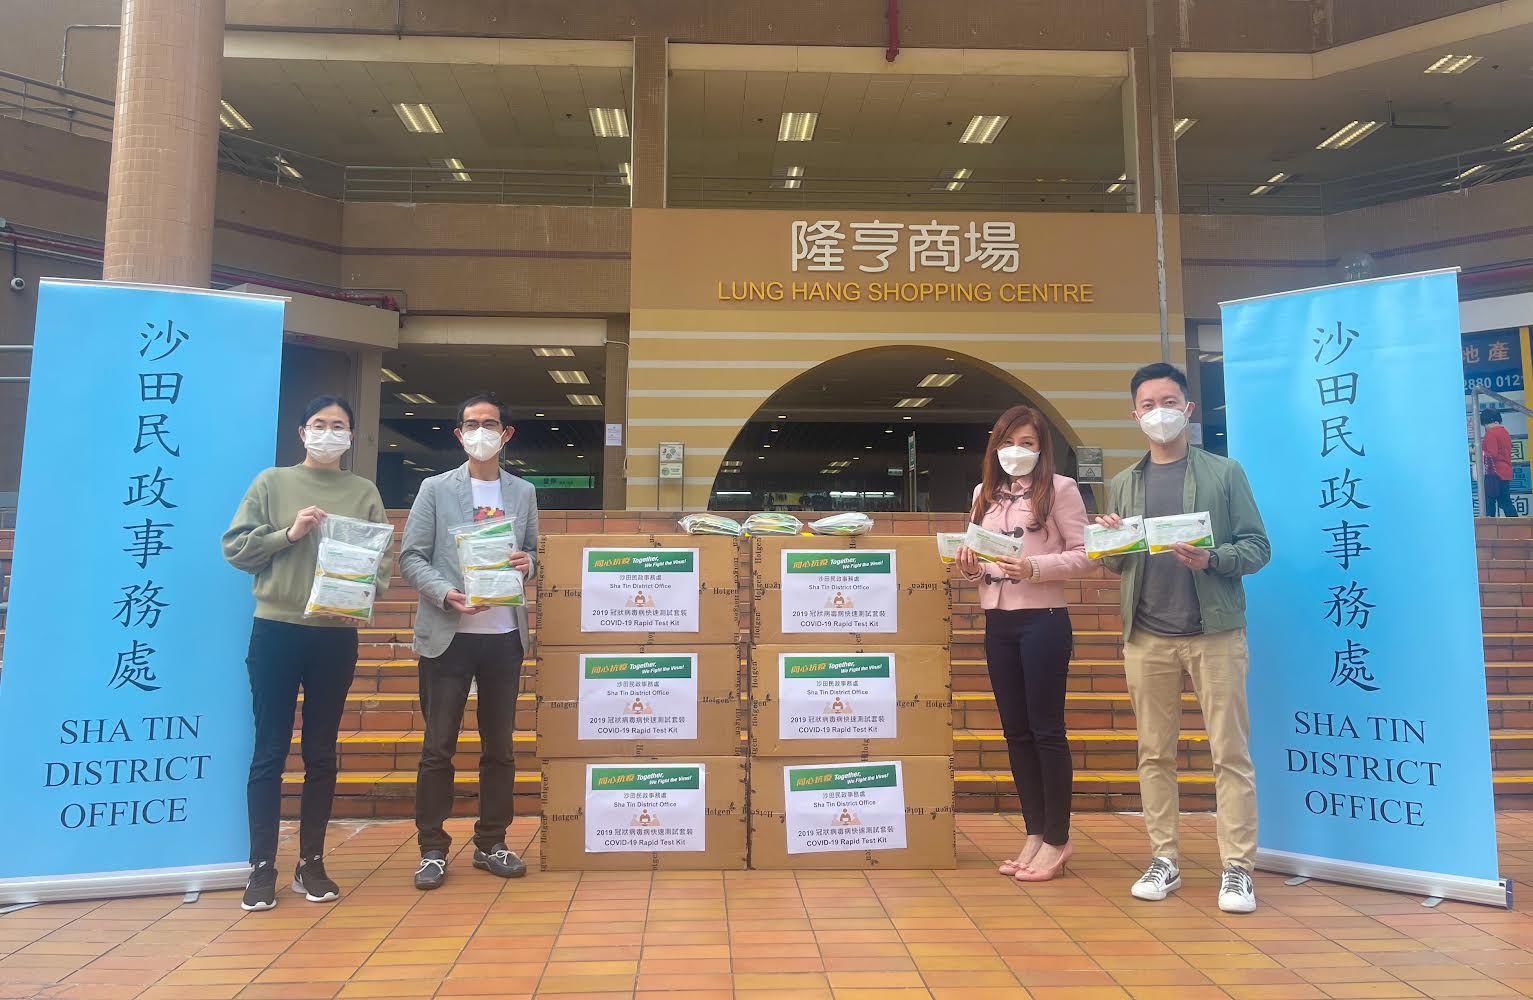 The Sha Tin District Office today (March 7) distributed COVID-19 rapid test kits to households, cleansing workers and property management staff living and working in Lung Hang Estate for voluntary testing through the Housing Department and the property management company.